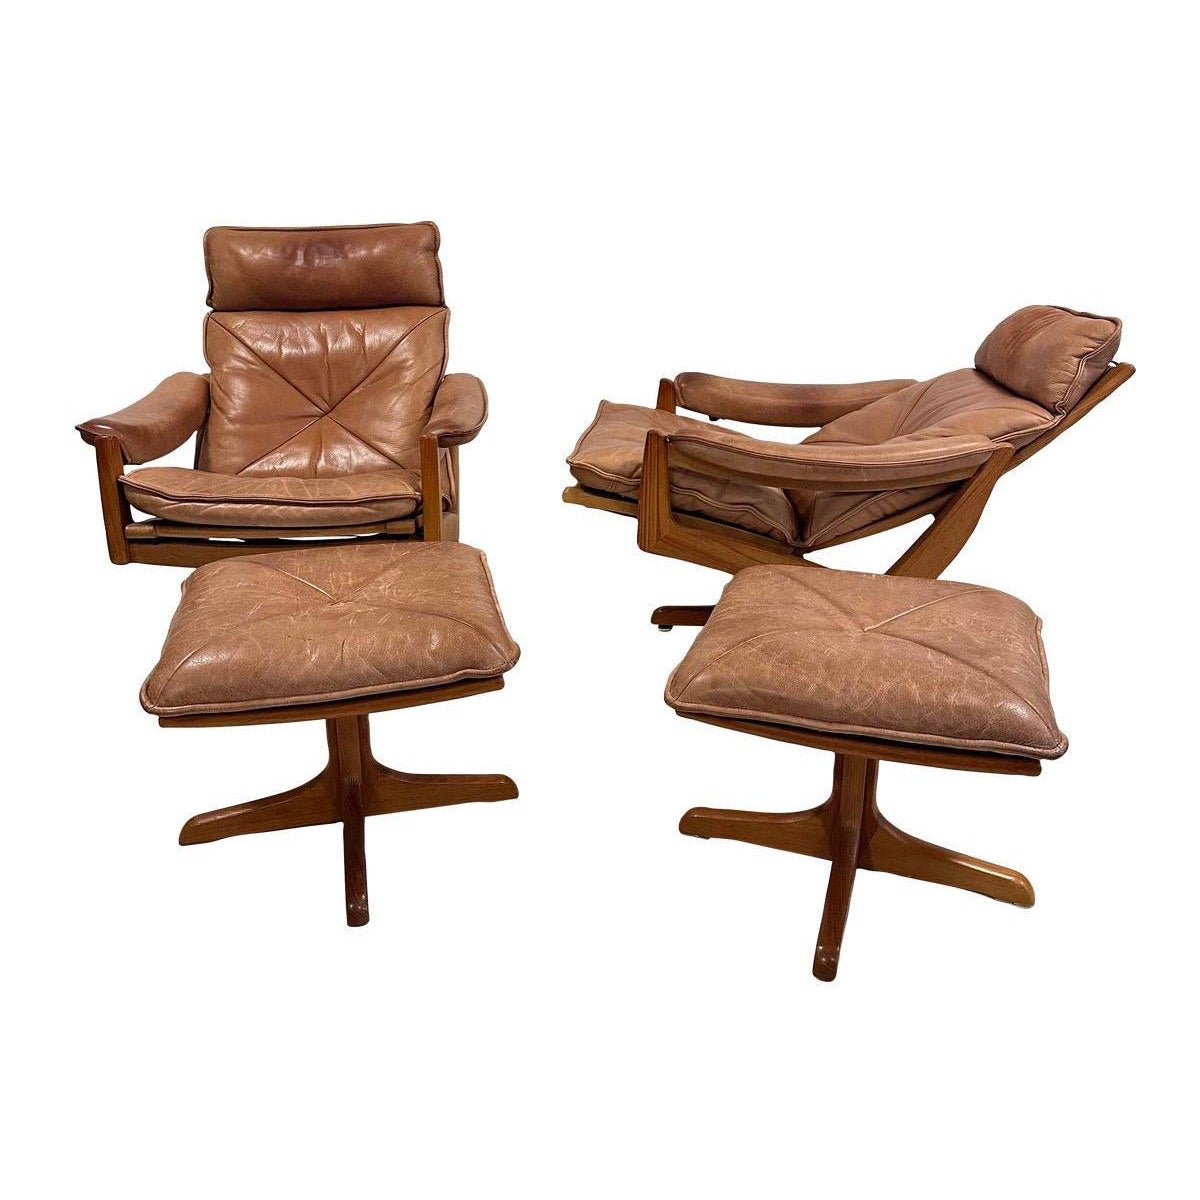 1970s soda galvino Denmark solid teak recliners with ottomans 